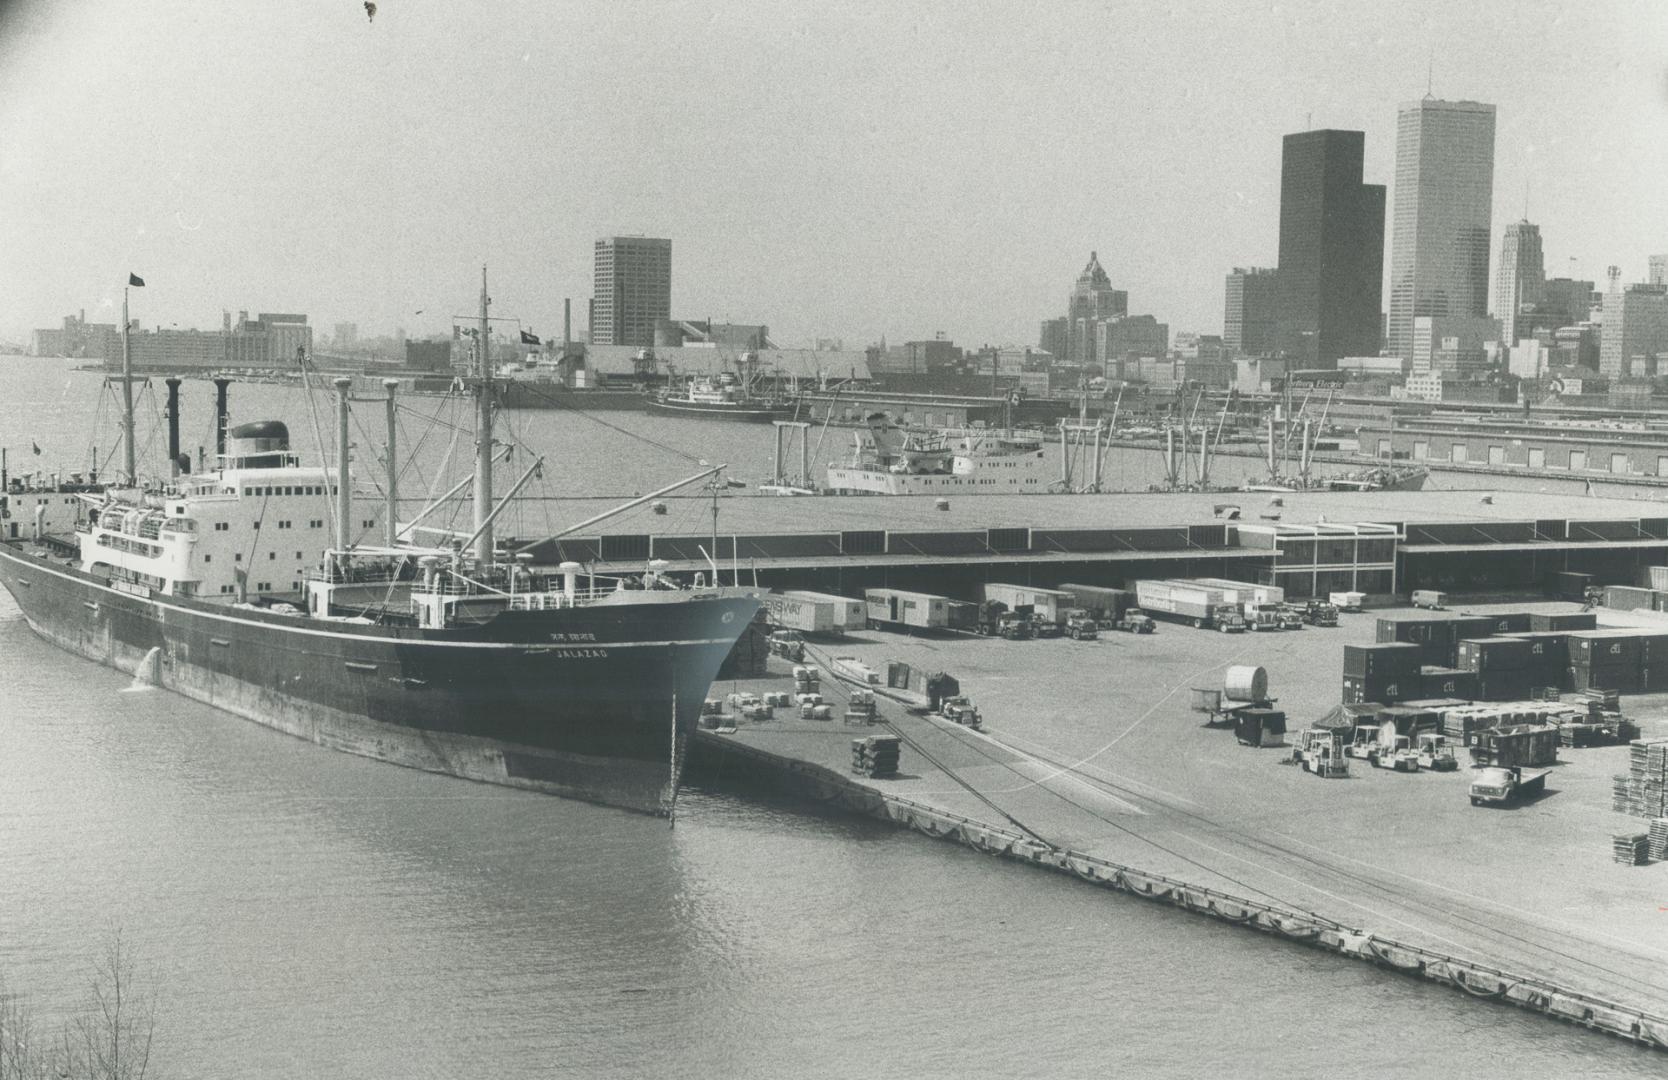 Image shows a big ship docked at the Harbour with some buildings in the background.